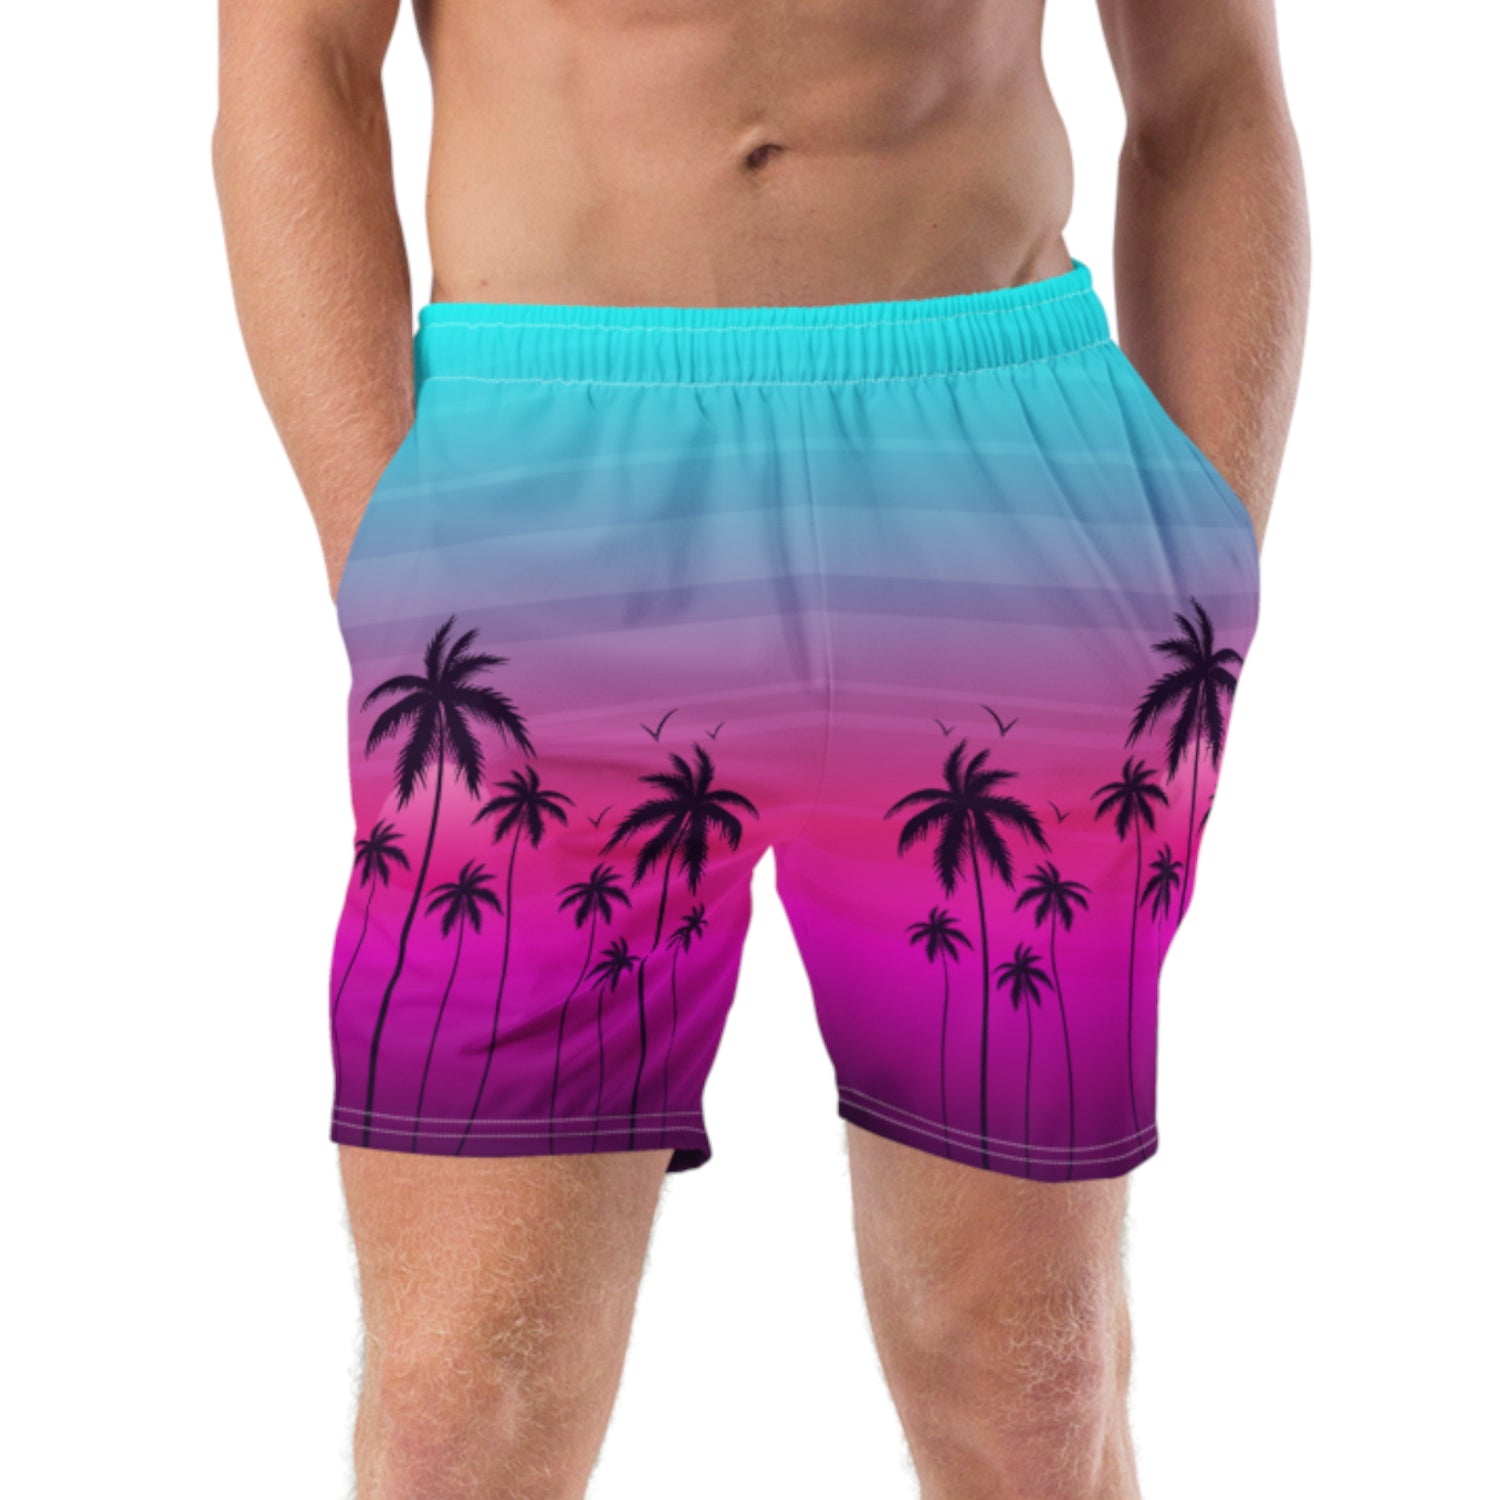 mens-swim-trunks-bathing-suit-swimming-board-shorts-arczeal-designs-collection